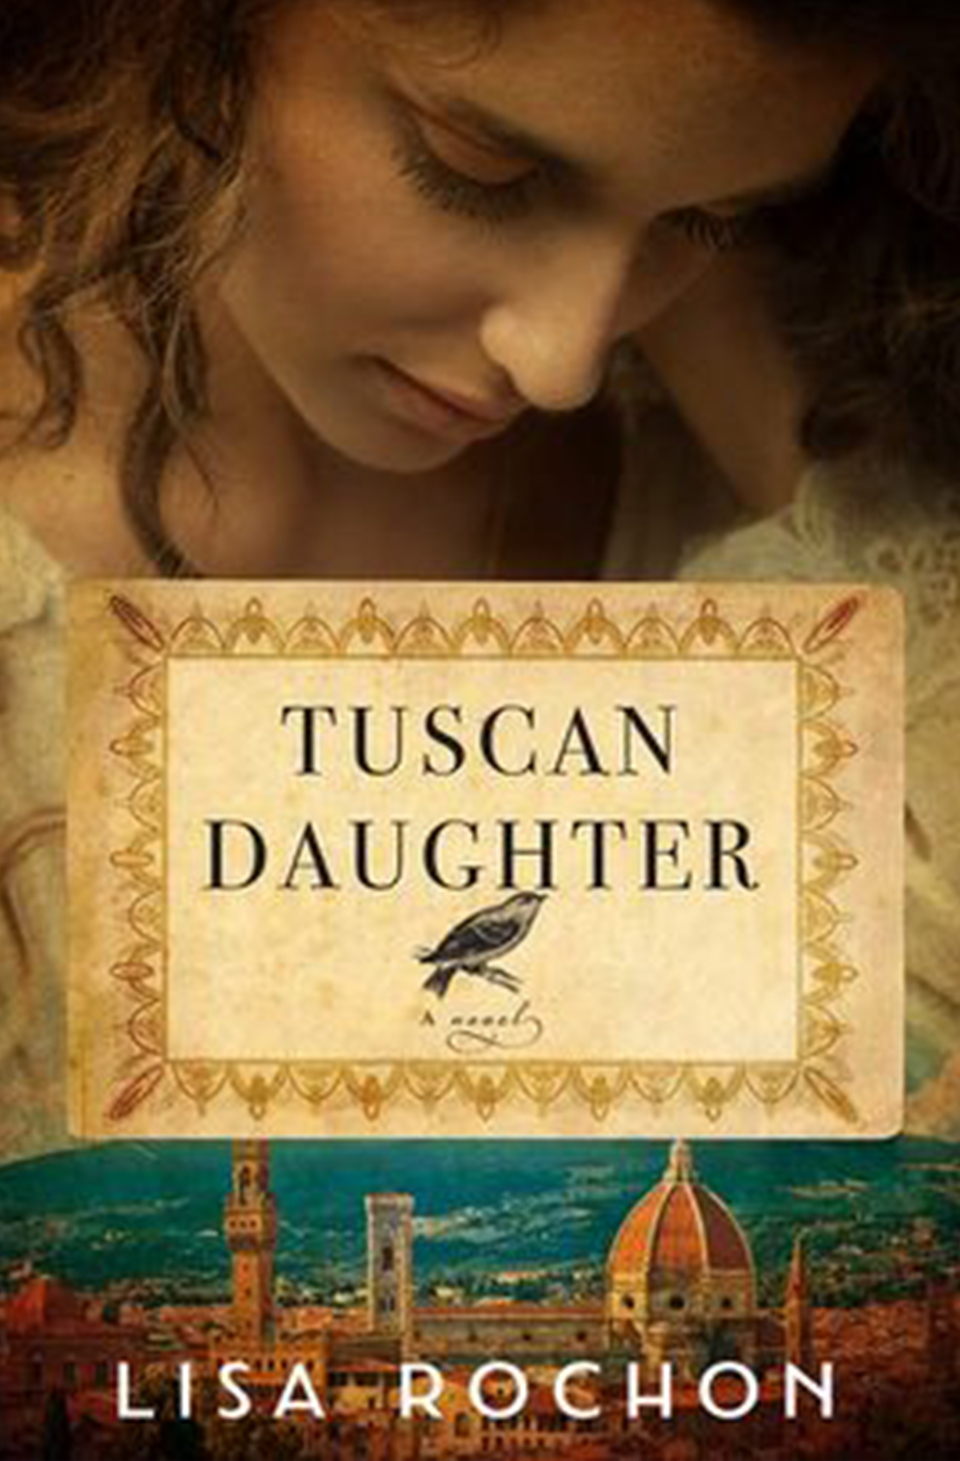 Tuscan Daughter by Lisa Rochon